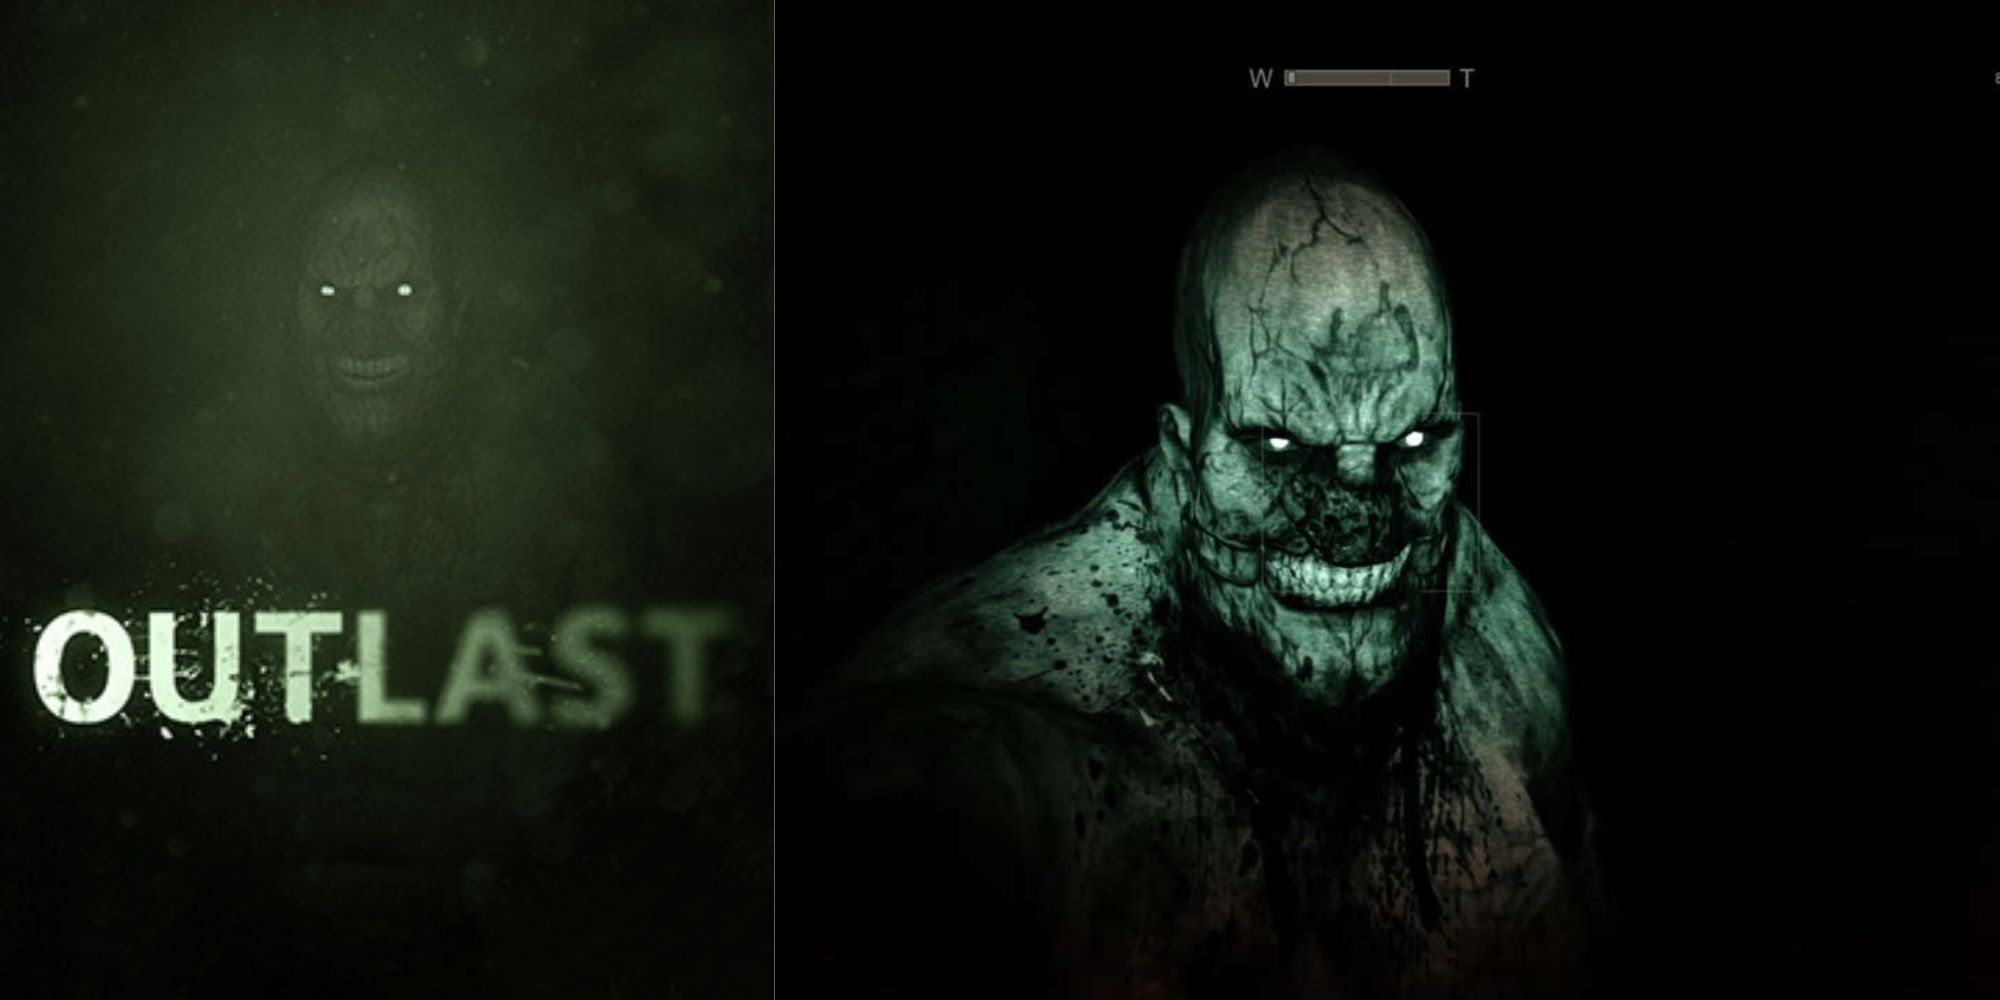 Outlast Murkoff Briefcase Edition - A Terrifying Monster Smiling In the Darkness